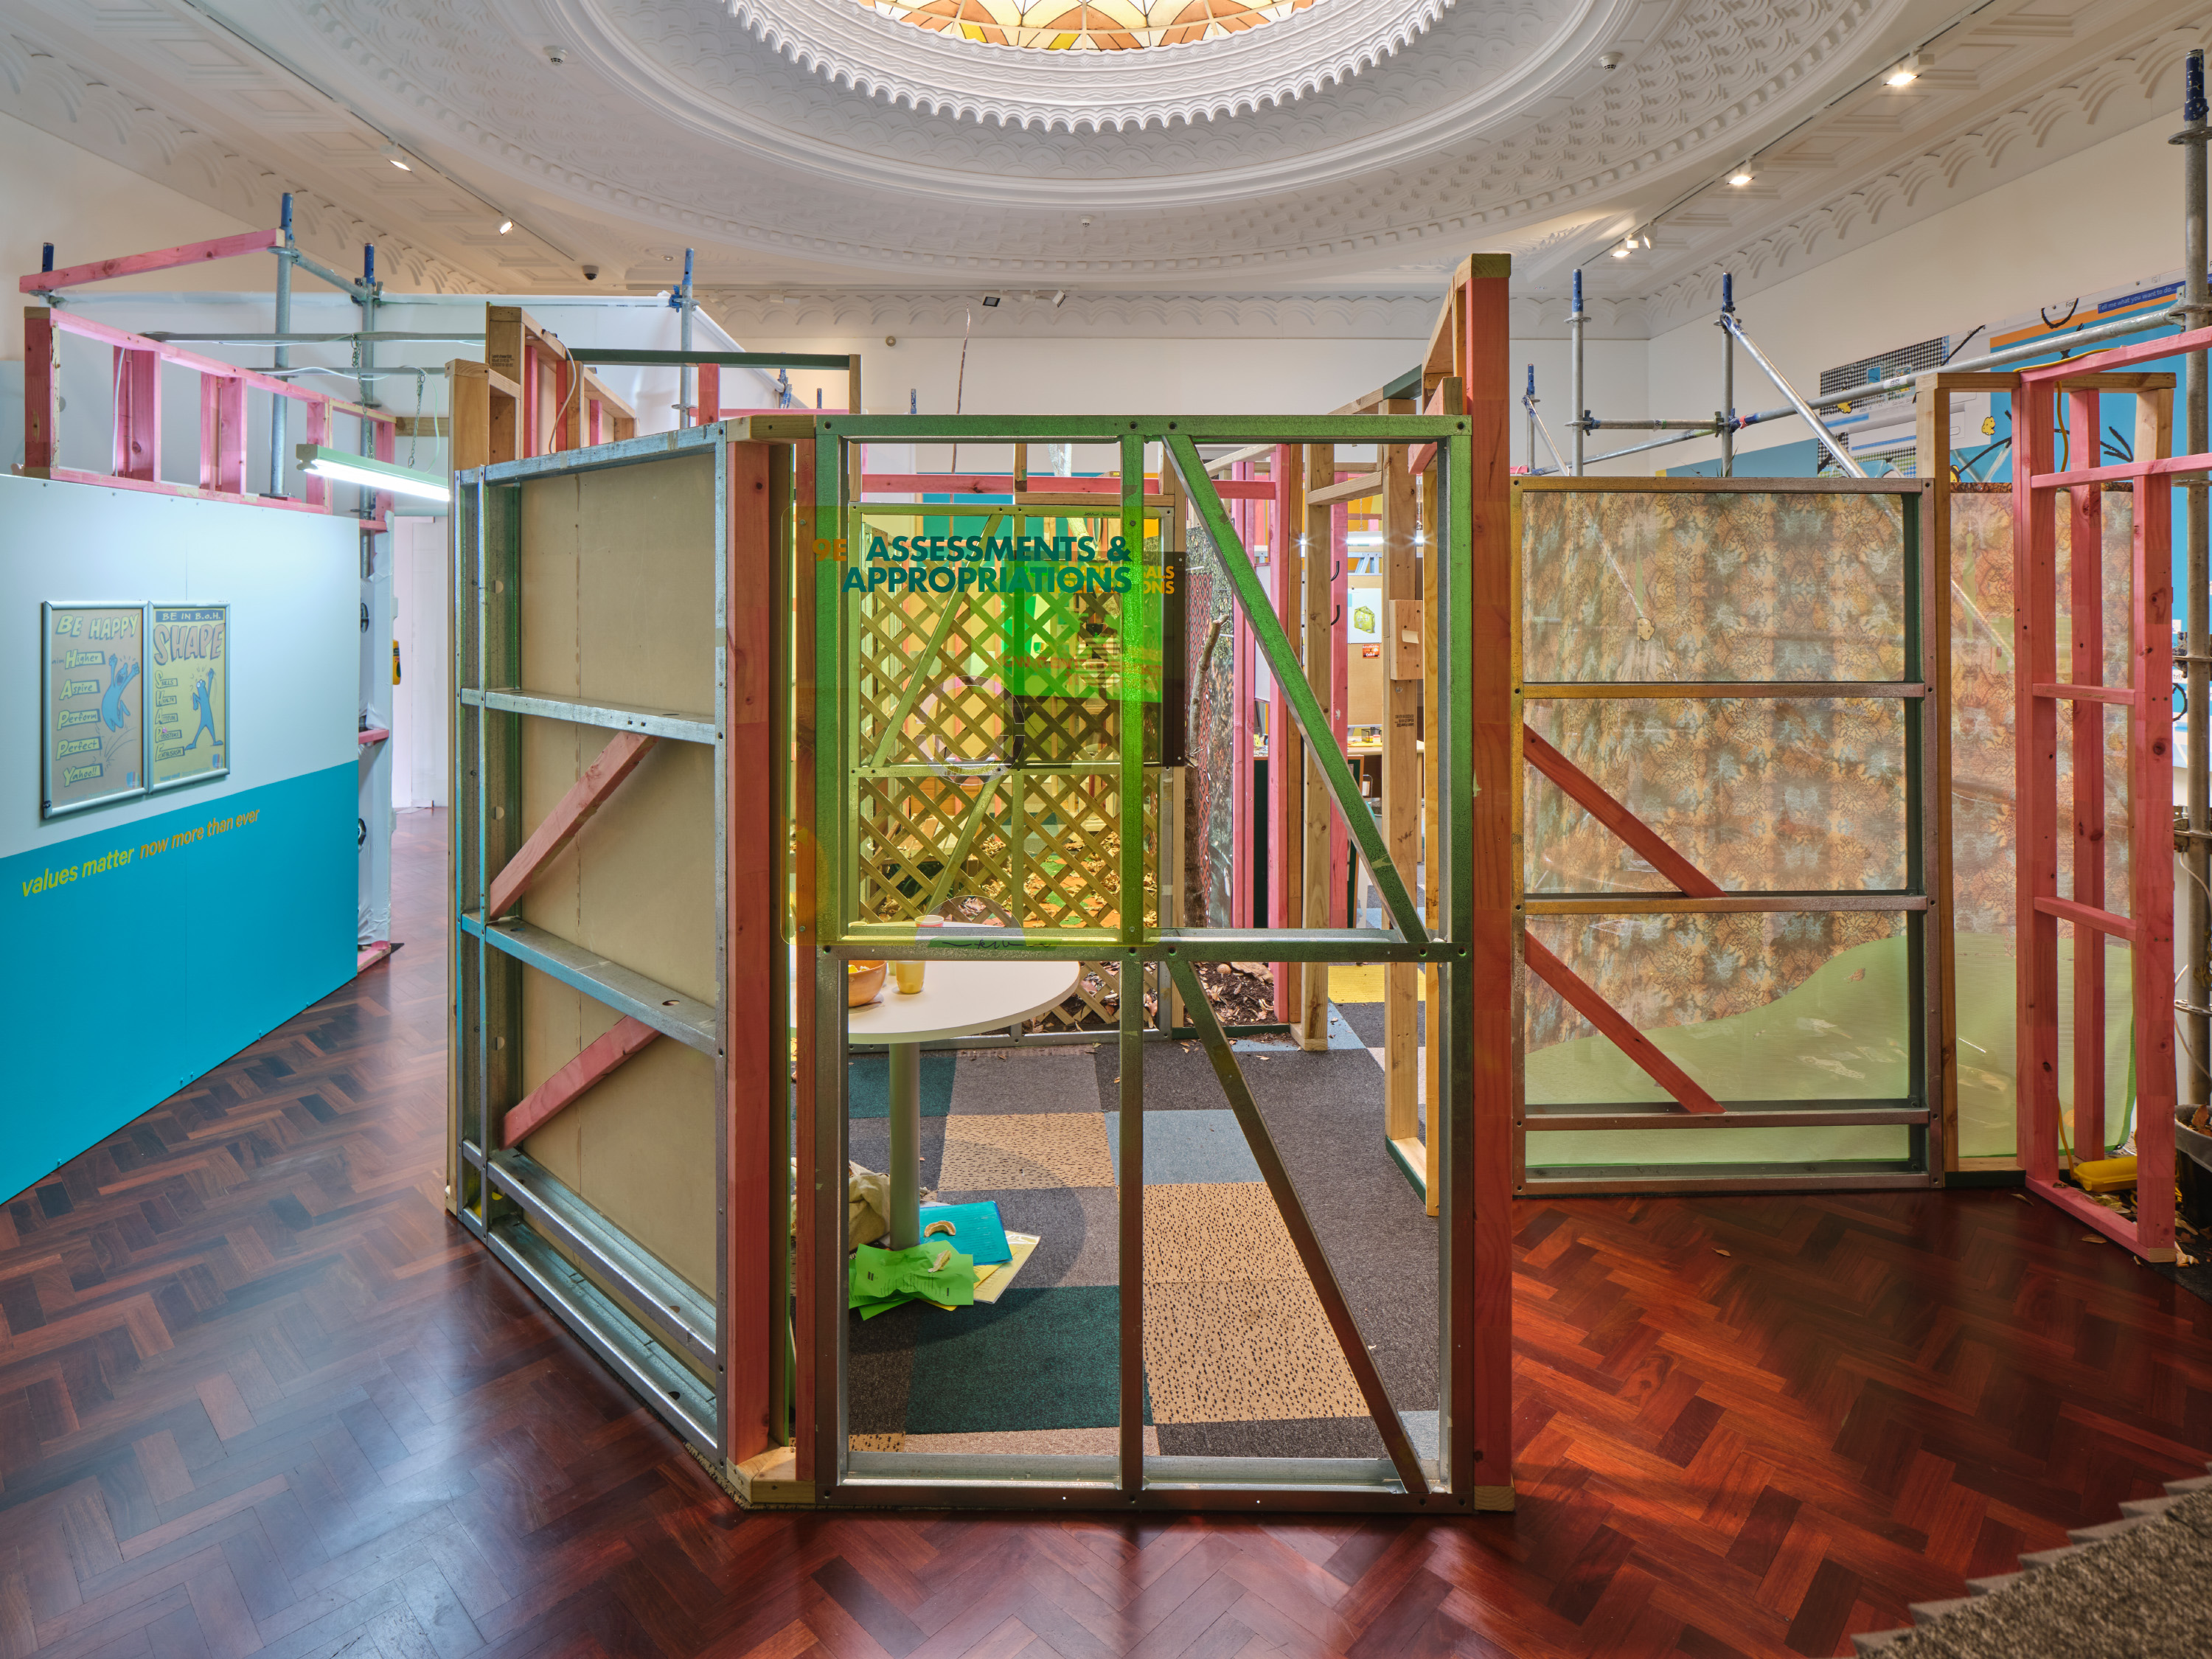 <p>Mark Schroder, <em>Fortune Teller</em>, 2021 (installation view), Gus Fisher Gallery, Auckland. Image courtesy of the artist and Gus Fisher Gallery. Photograph: Sam Hartnett.</p>
